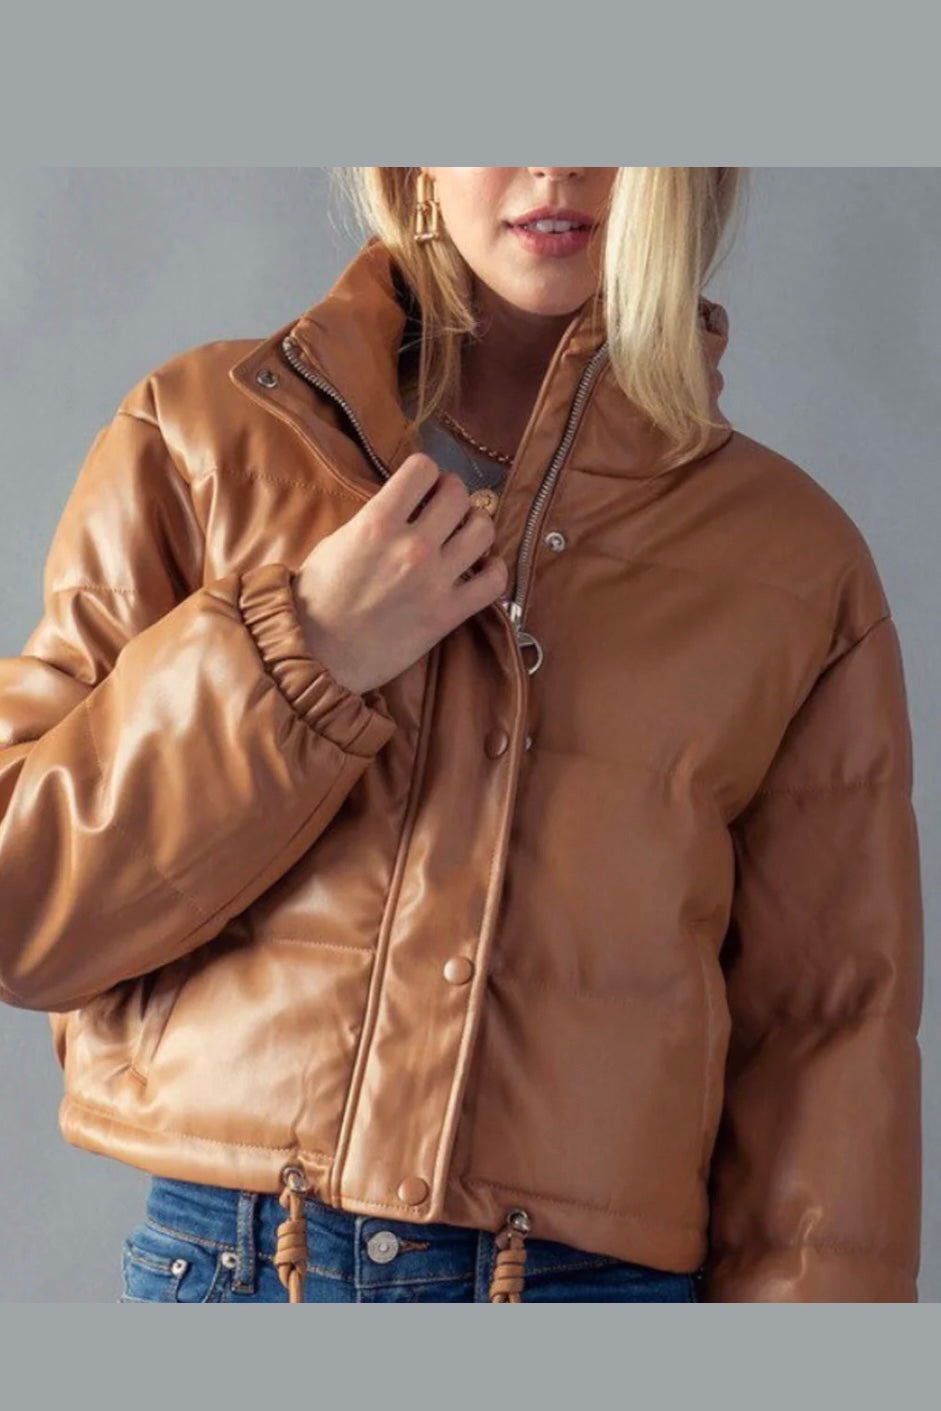 Camel Faux Leather Short Crop Puffer Jacket